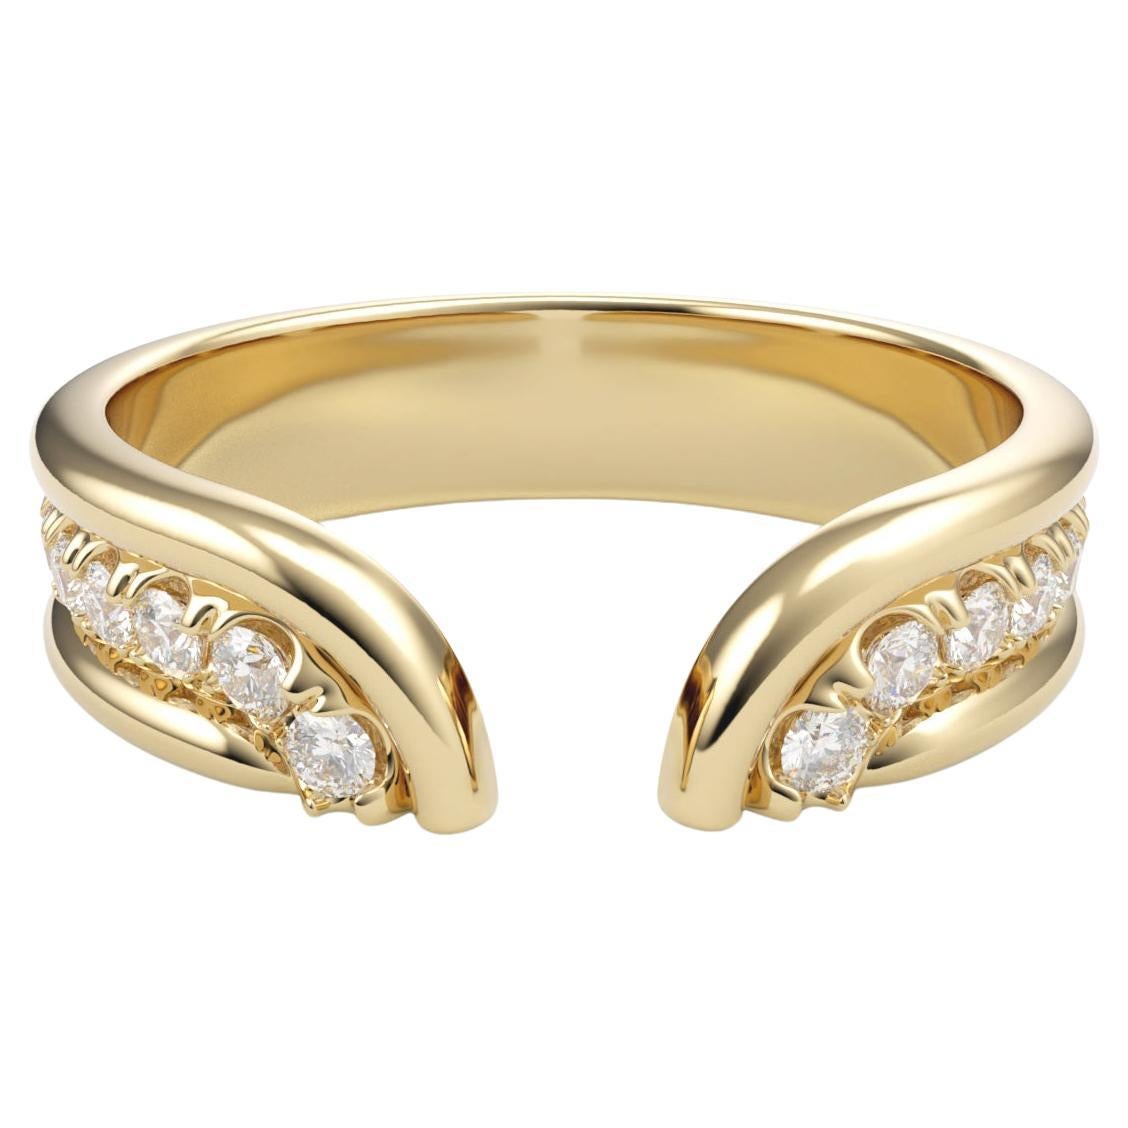 Casey Perez open band ring with ribbed detail and diamond pave For Sale